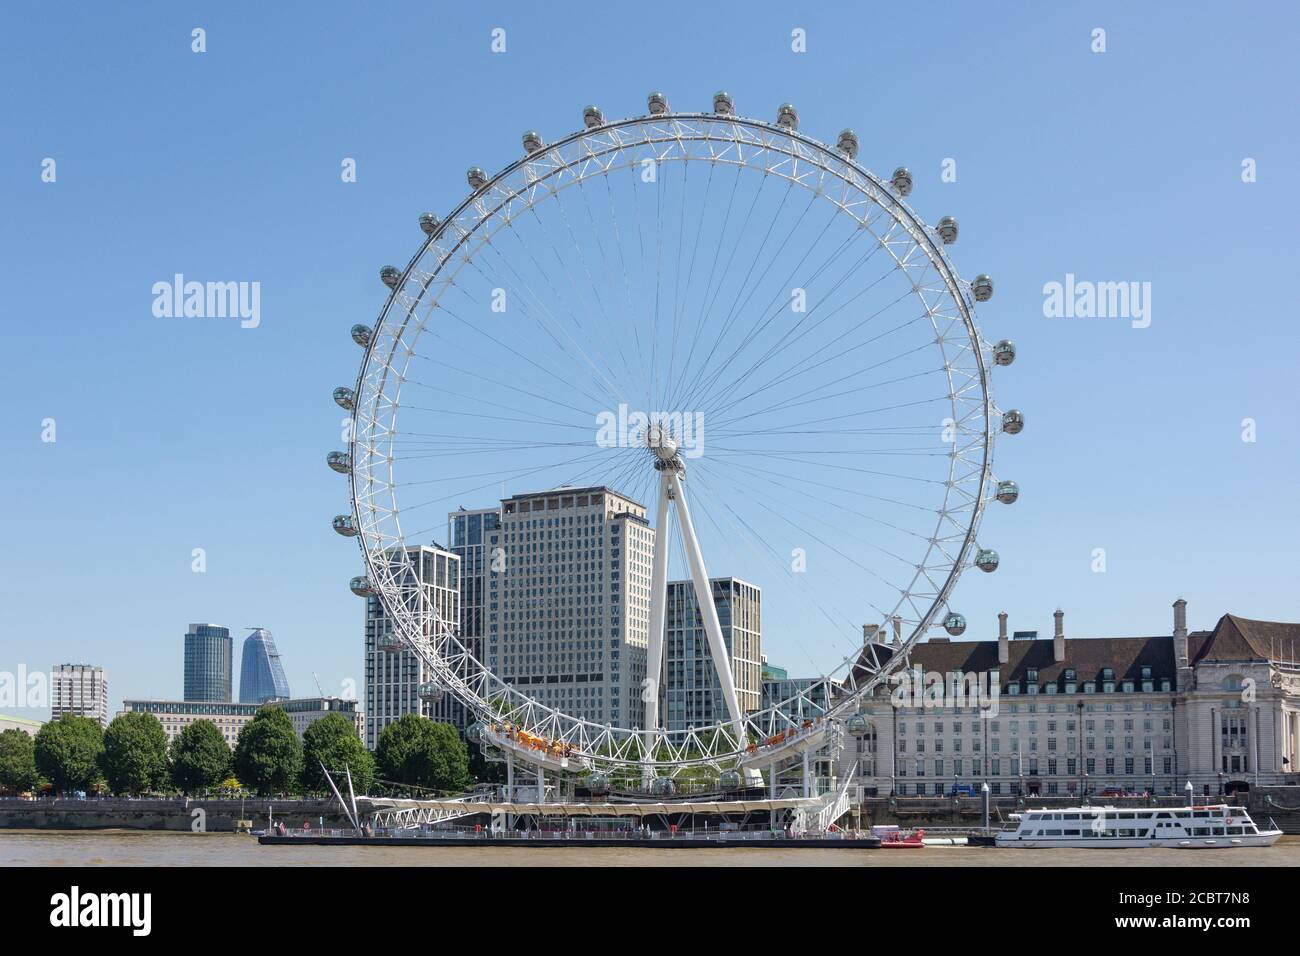 The London Eye (Millennium Wheel) across River Thames, South Bank, City of Westminster, Greater London, England, United Kingdom Stock Photo